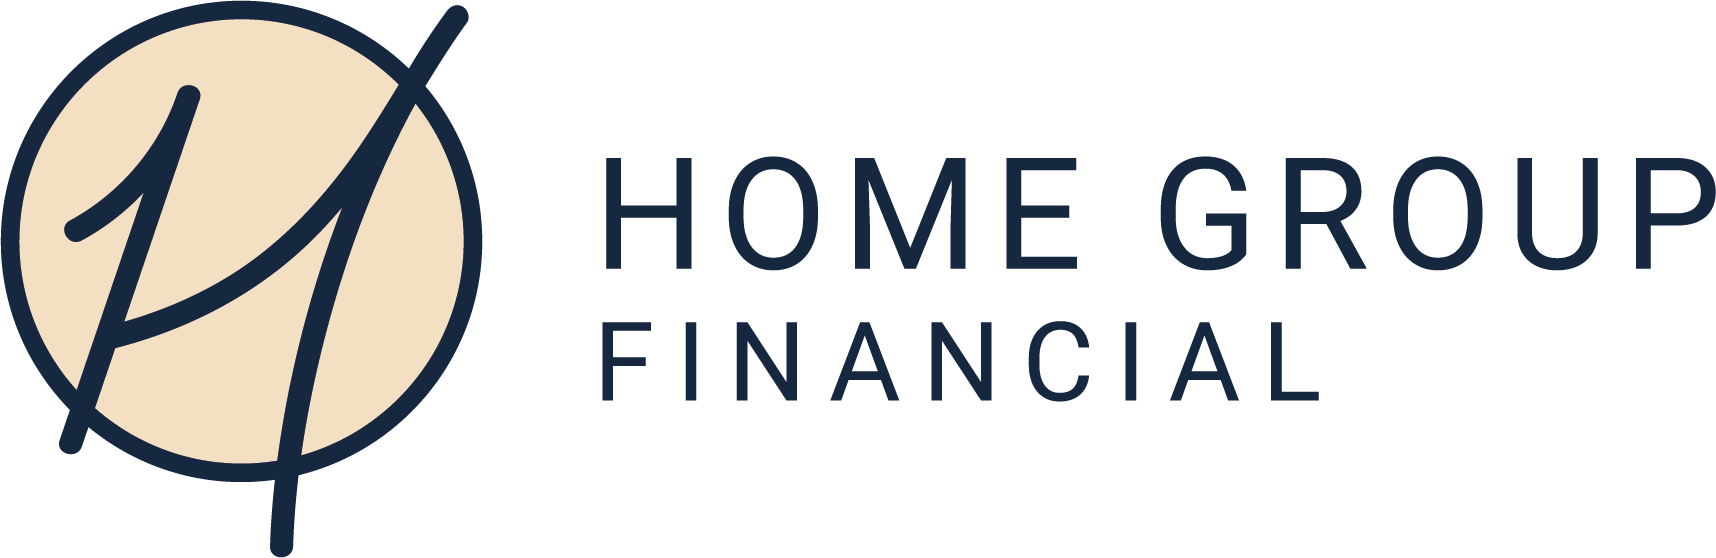 Logo of Home Group Financial Ltd Mortgage Brokers In Corsham, Wiltshire